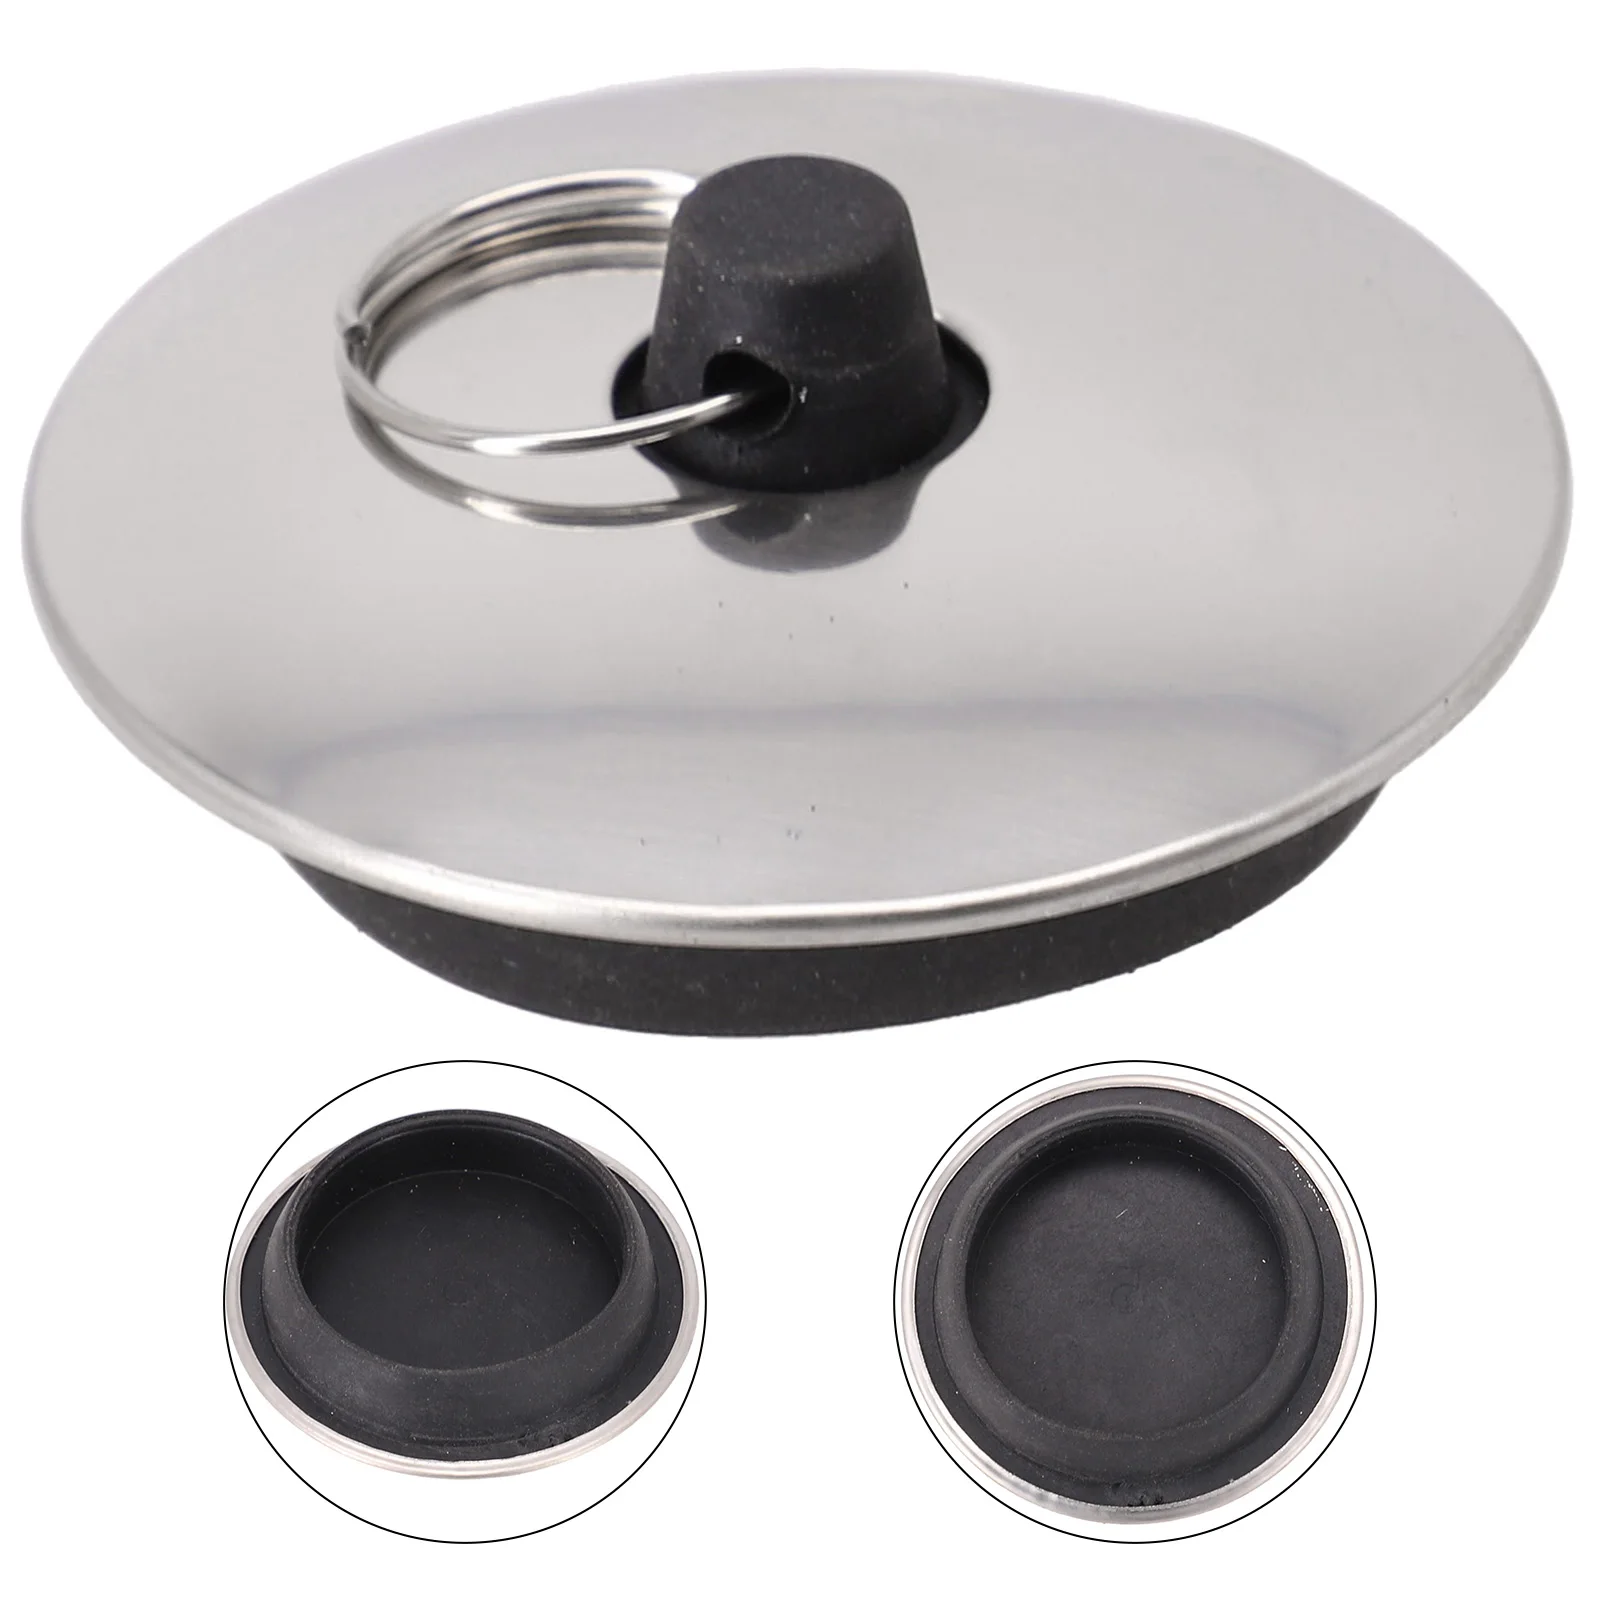 Bathroom Accessries Rubber Sink Plug Drain Stopper Round Sink Water Stopper Washroom With Ring Bathtub Accessories